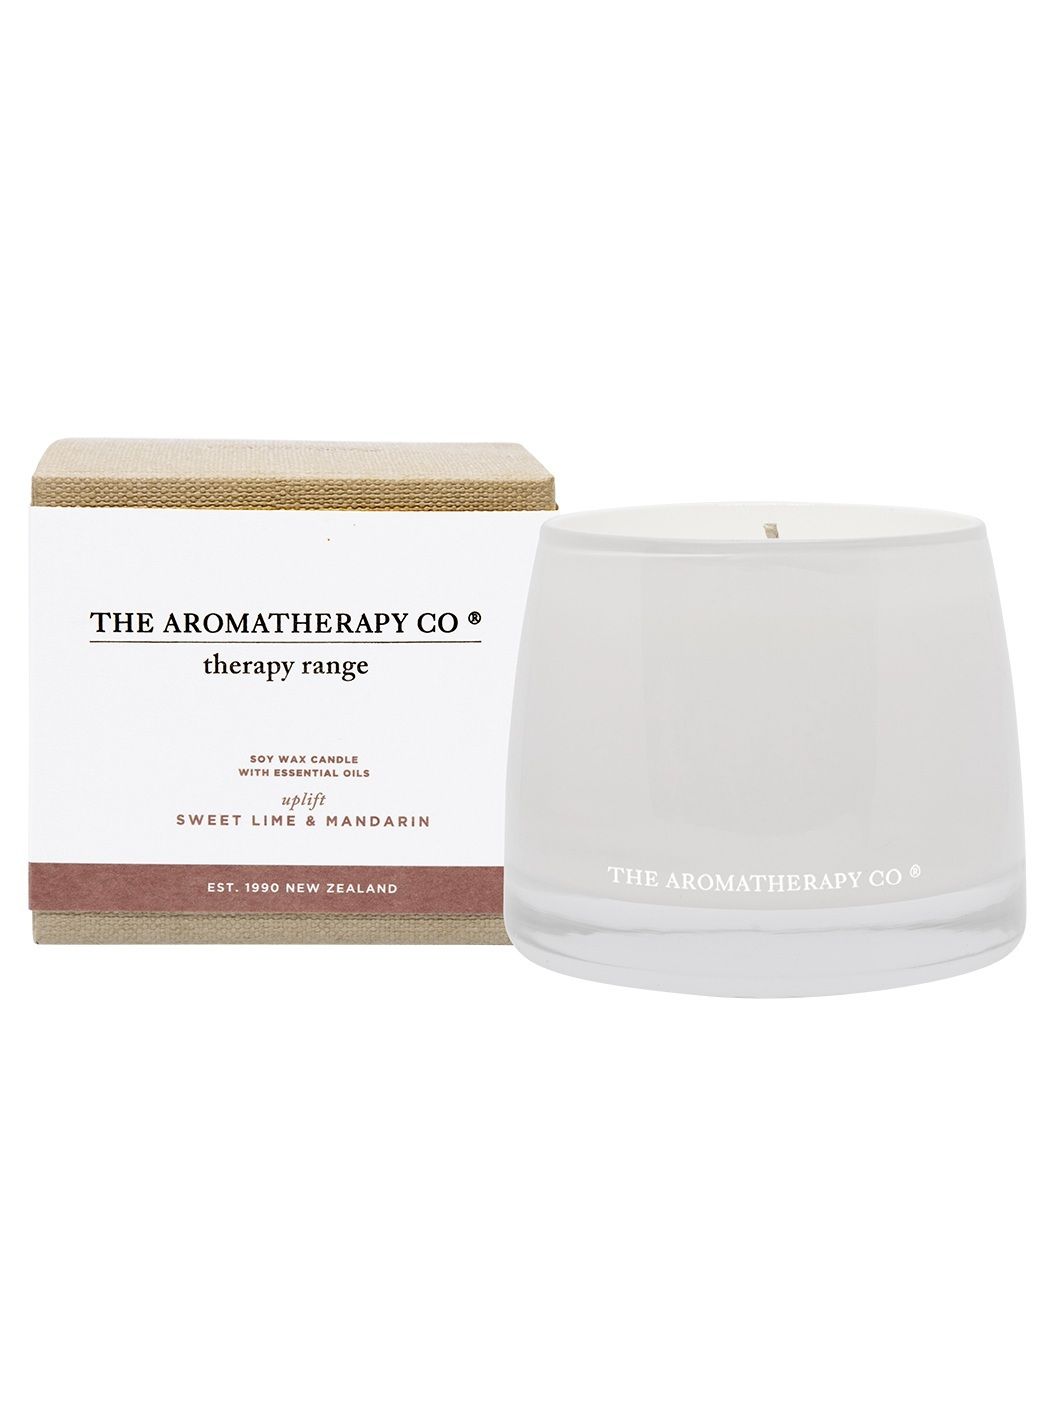 The Aromatherapy Co. - Therapy Candle - Sweet Lime & Mandarin